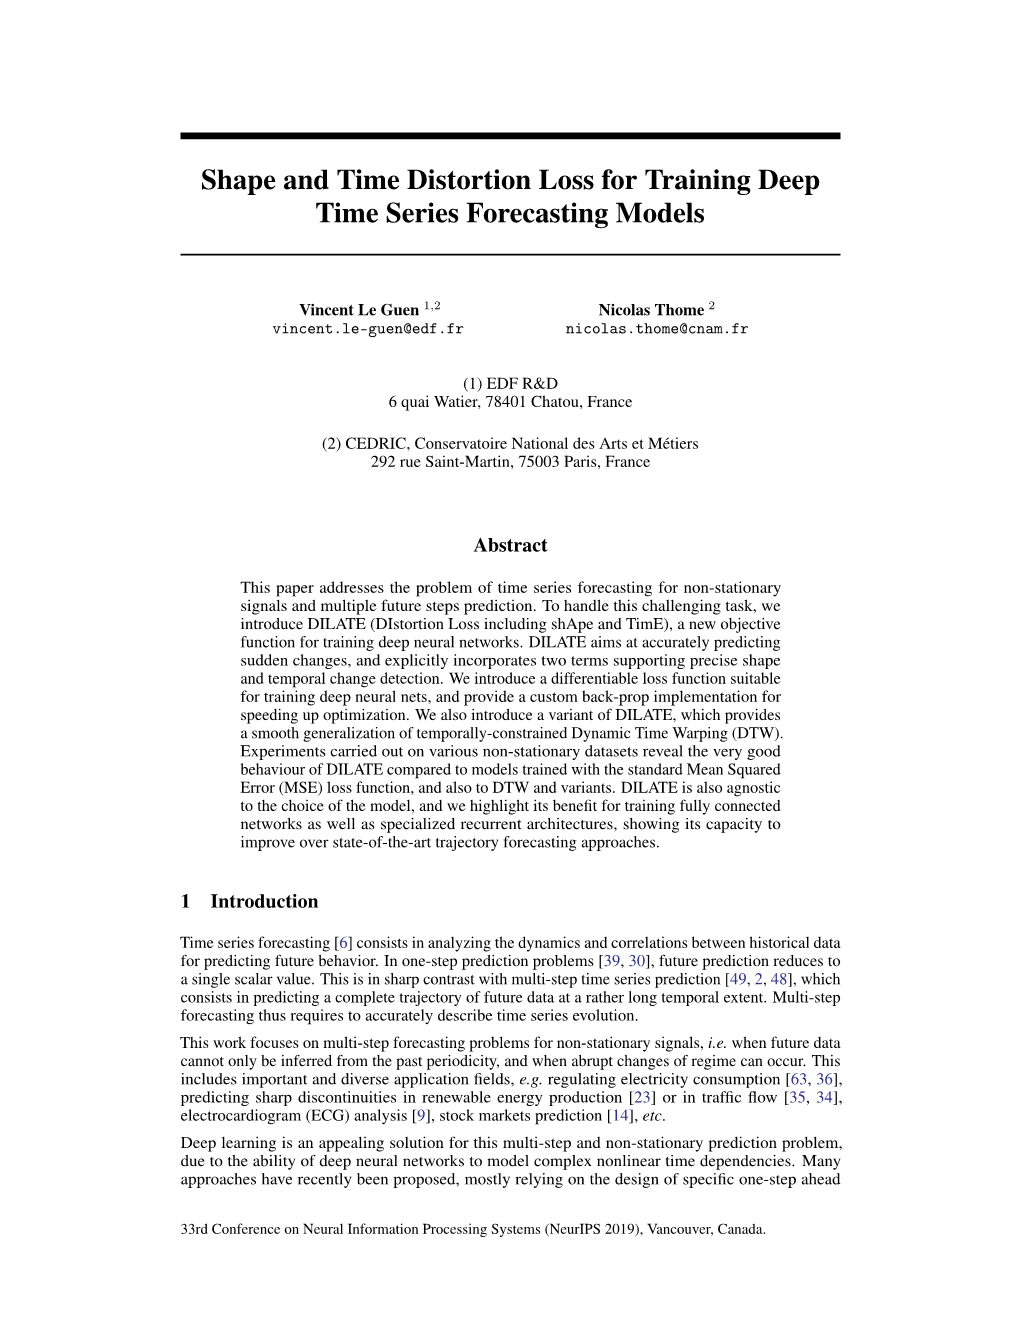 Shape and Time Distortion Loss for Training Deep Time Series Forecasting Models